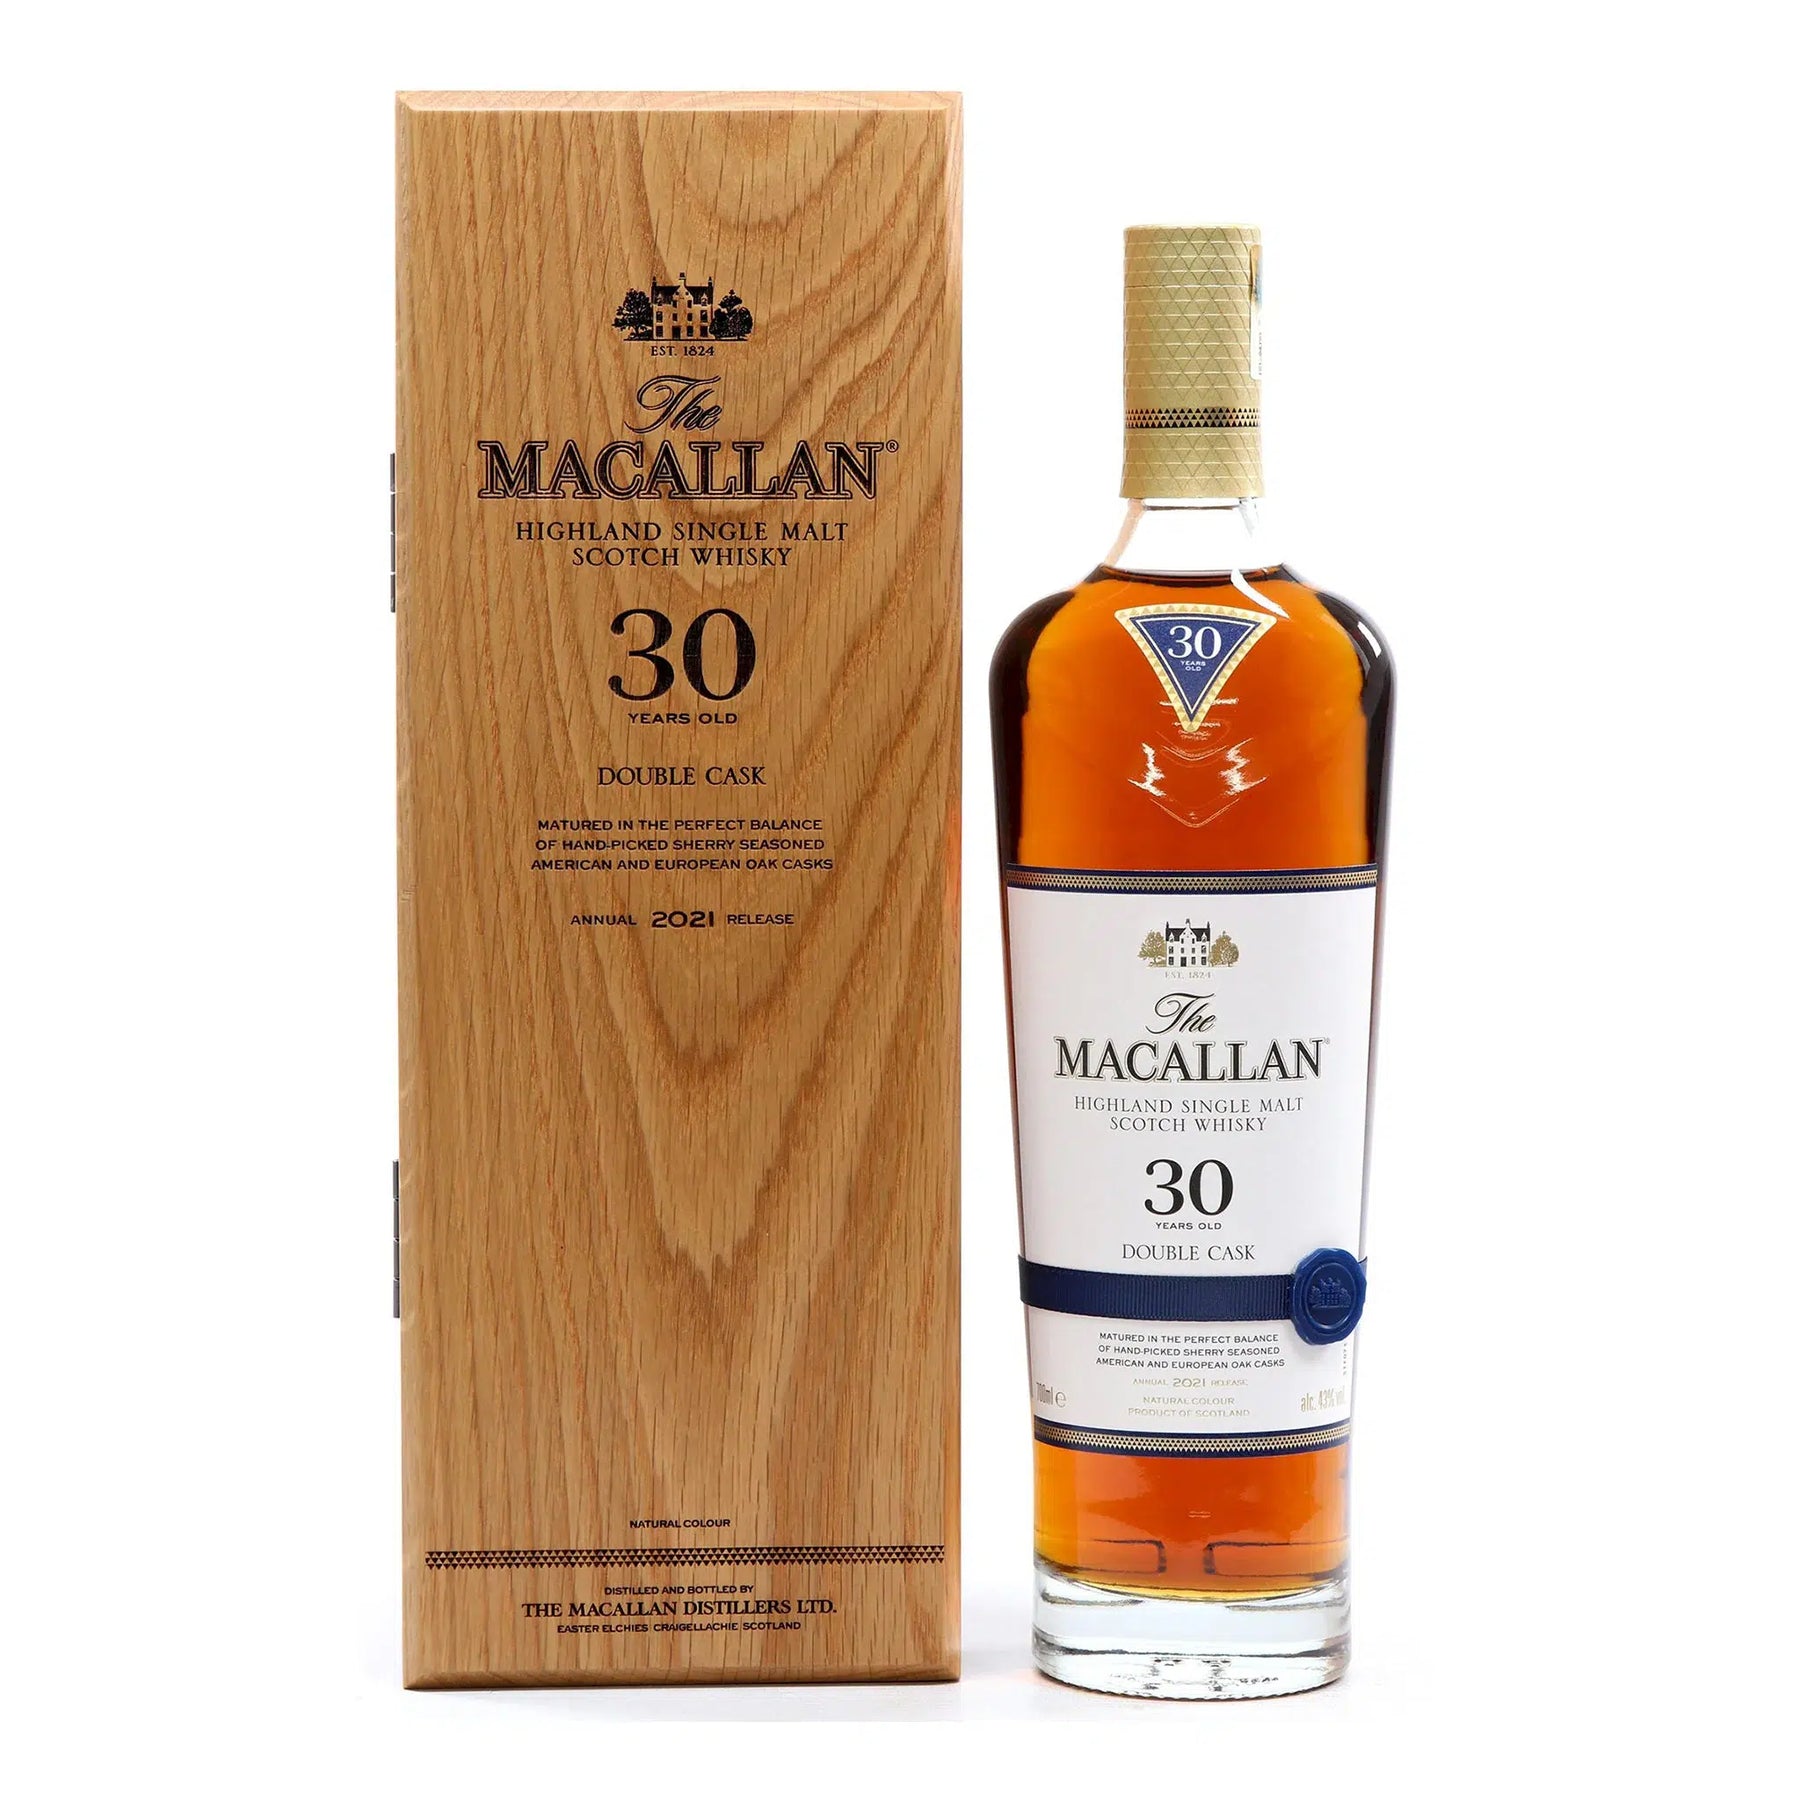 The Macallan Double Cask 30 Year Old (2021 Release) Single Malt Scotch Whisky 700ml